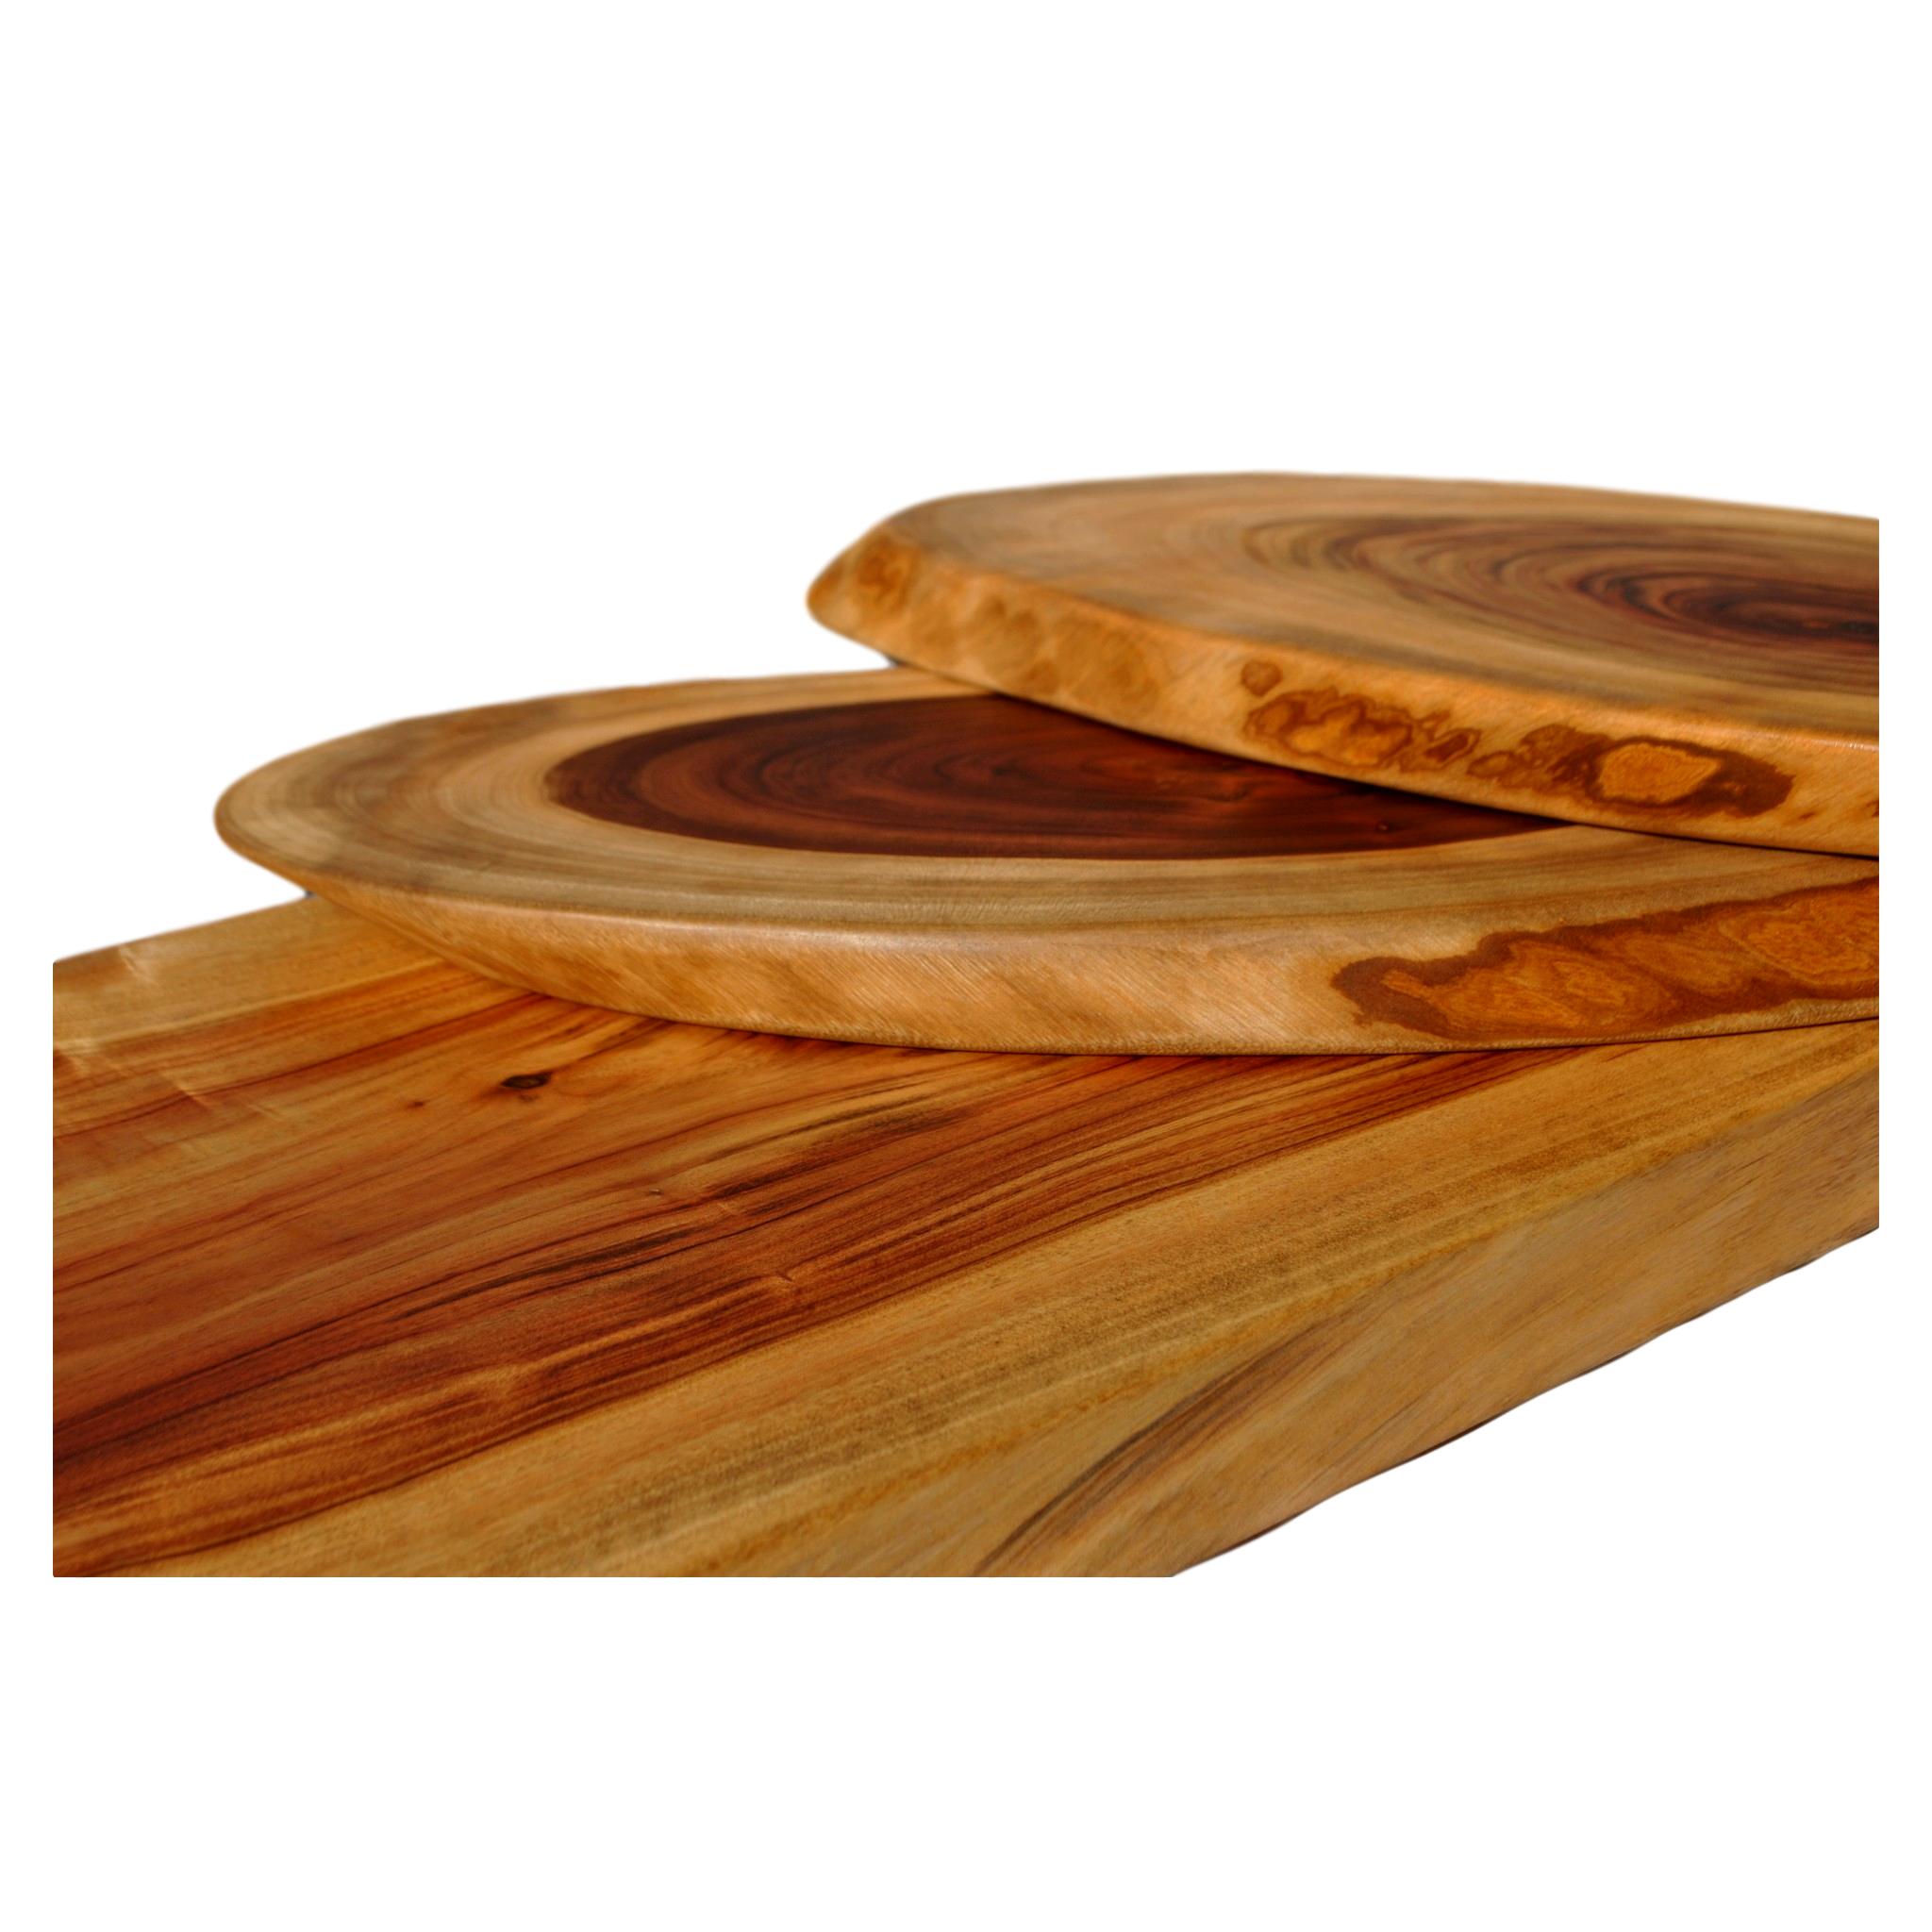 extra large wooden chopping boards natural shape handmade in australia